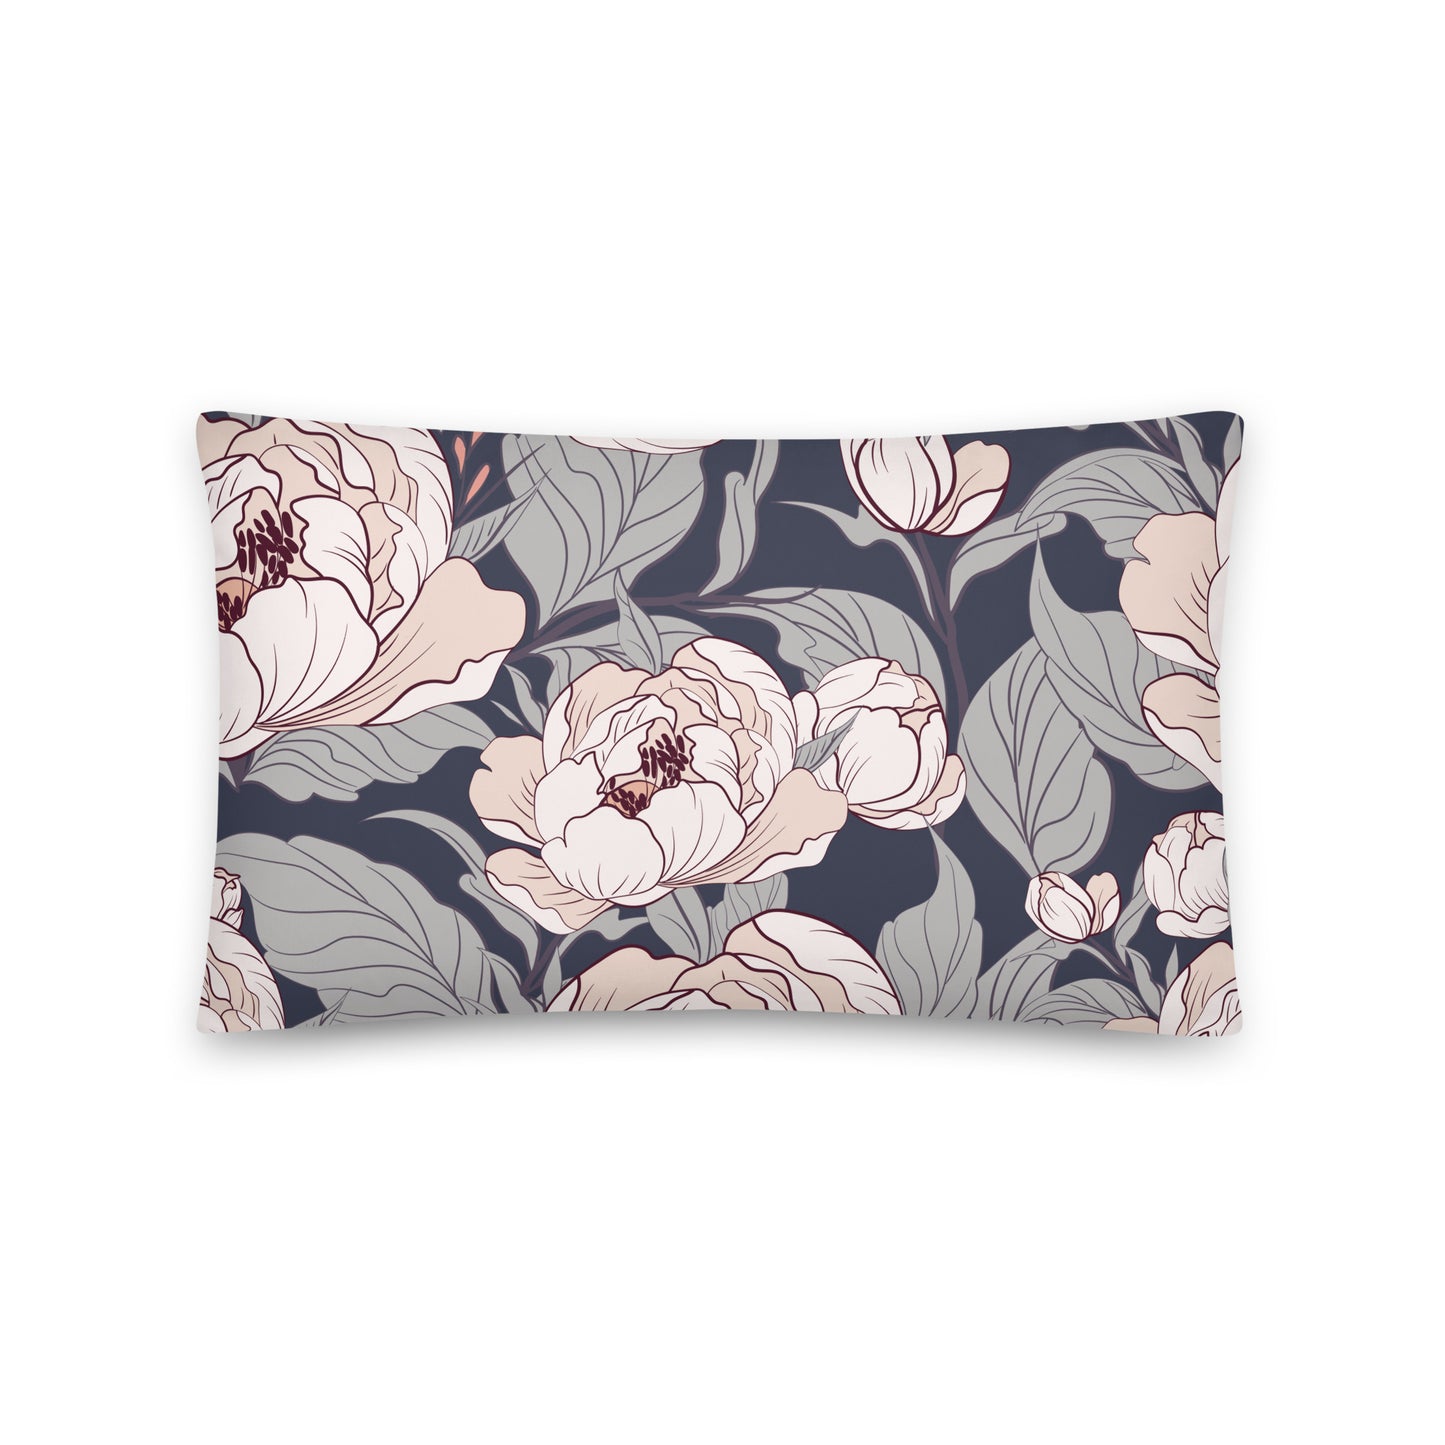 Flower Painting - Sustainably Made Pillows